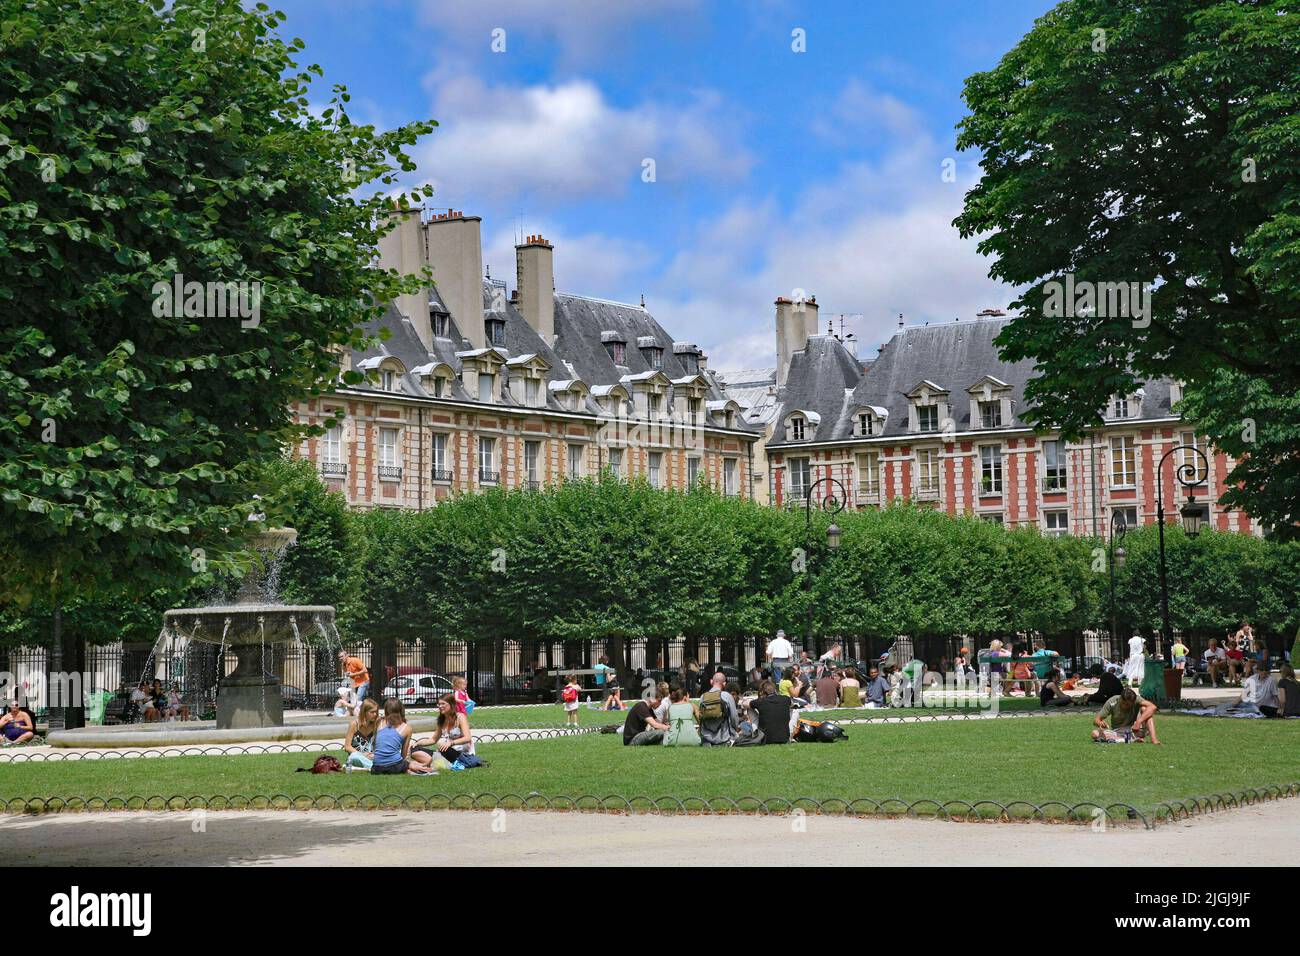 Families with children relax on the lawn of the Place des Vosges gardens on a warm summer day Stock Photo